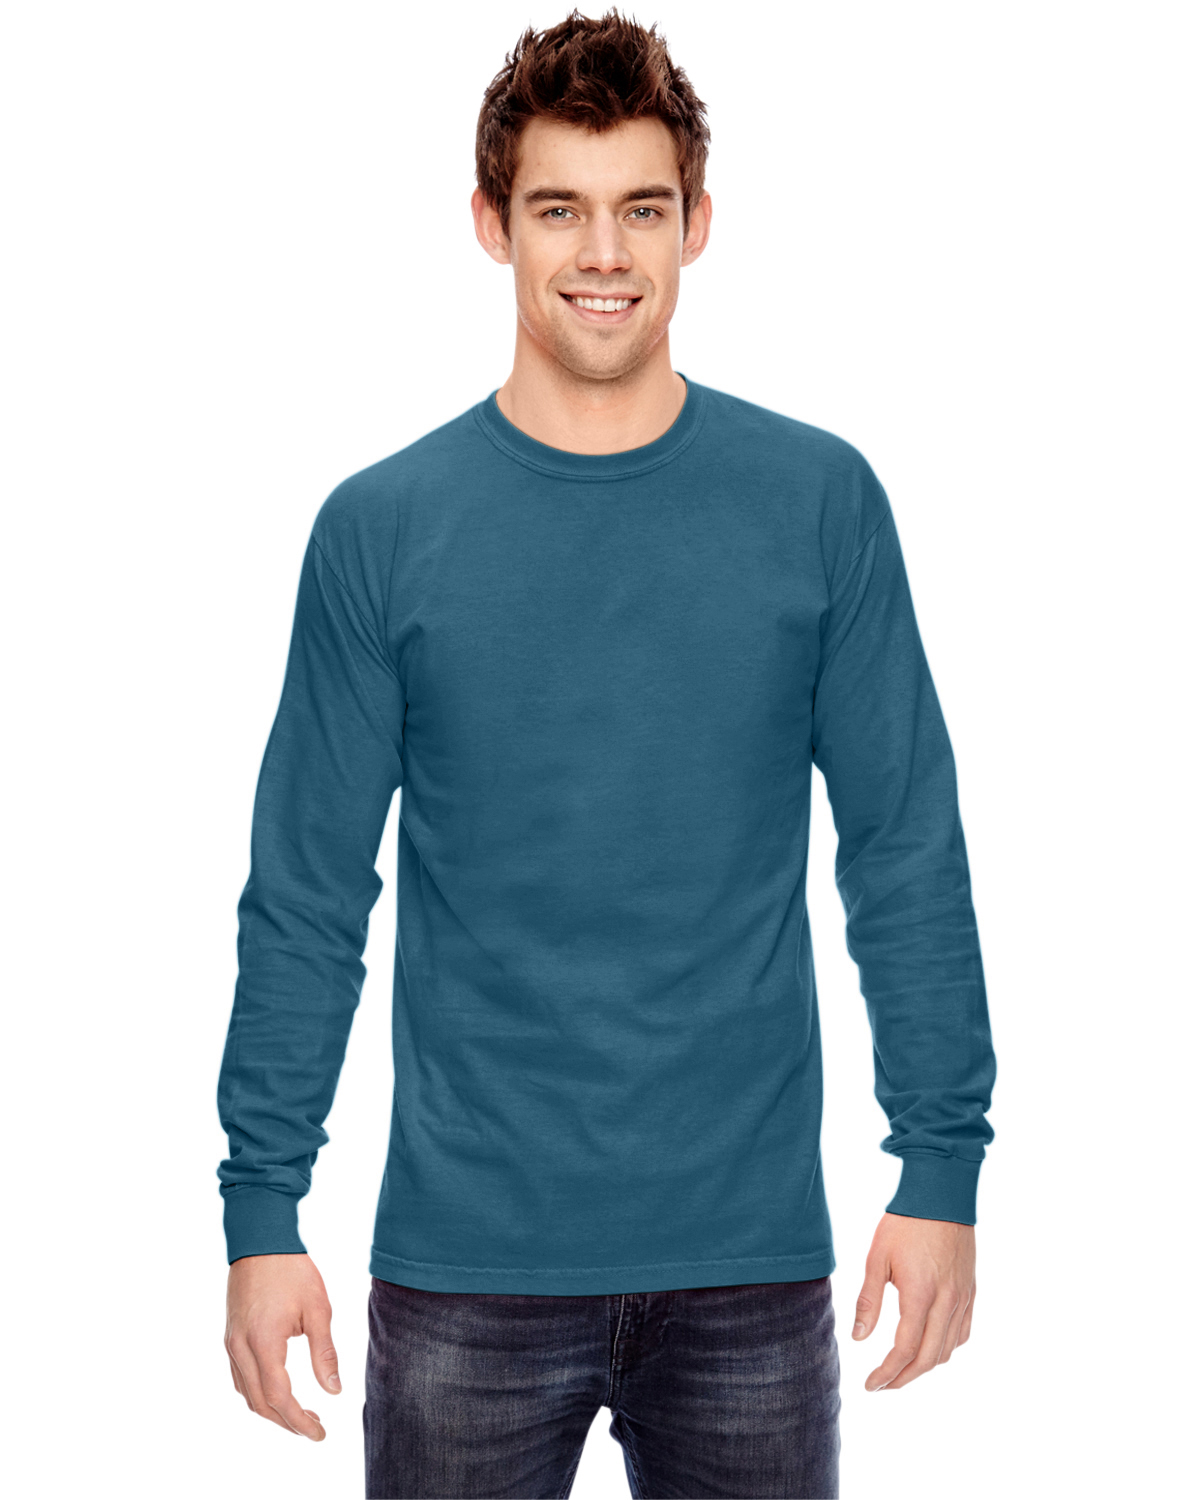 S05615 - Breeze - Adult RING SPUN Combed Cotton Long Sleeve